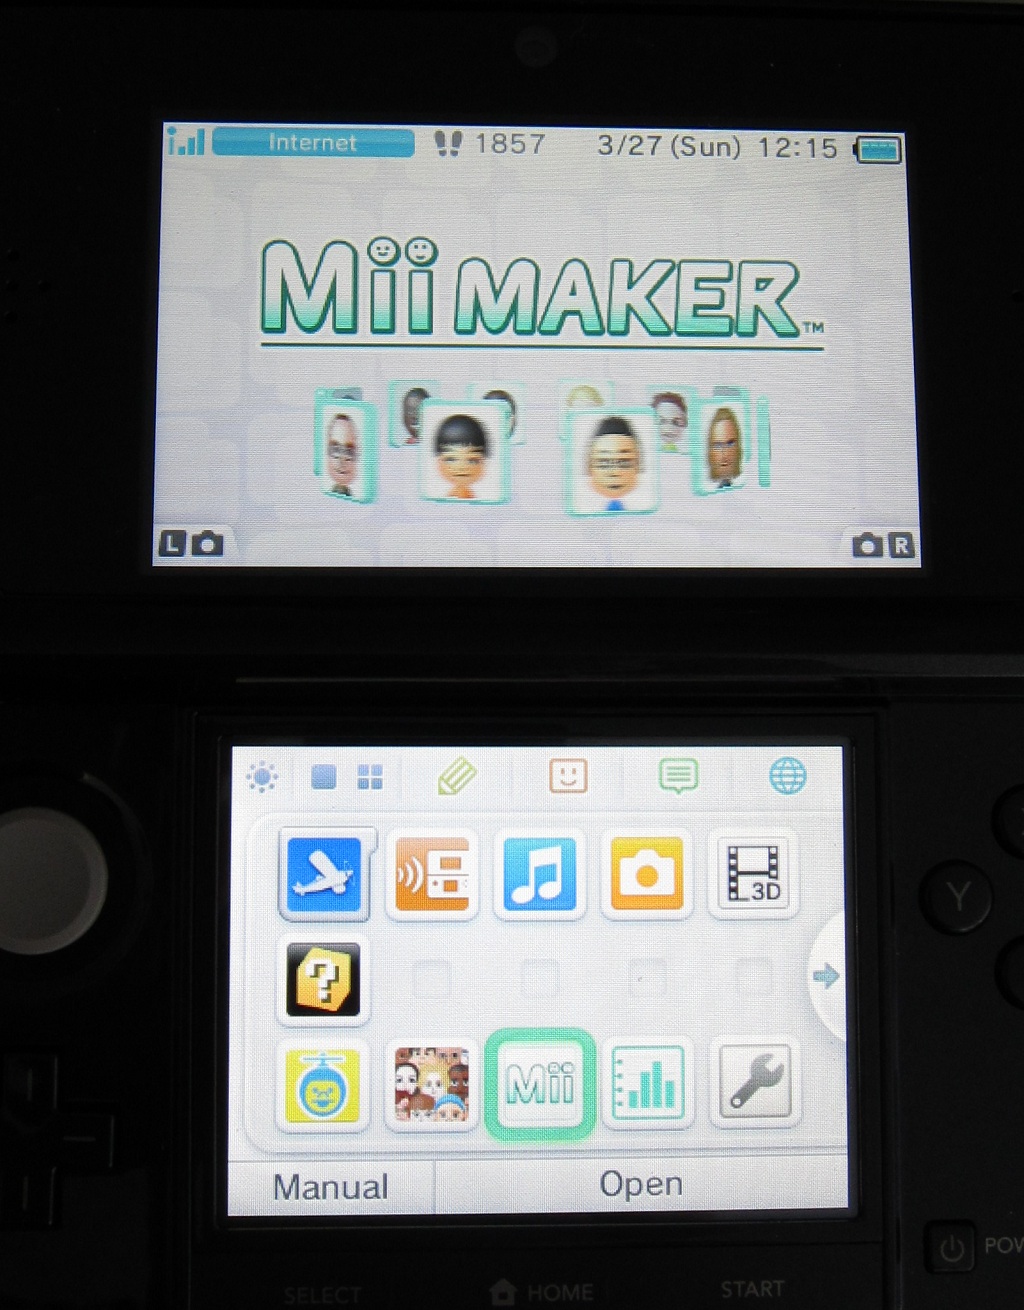 Nintendo 3DS: Create QR Code Image of Mii for Sharing